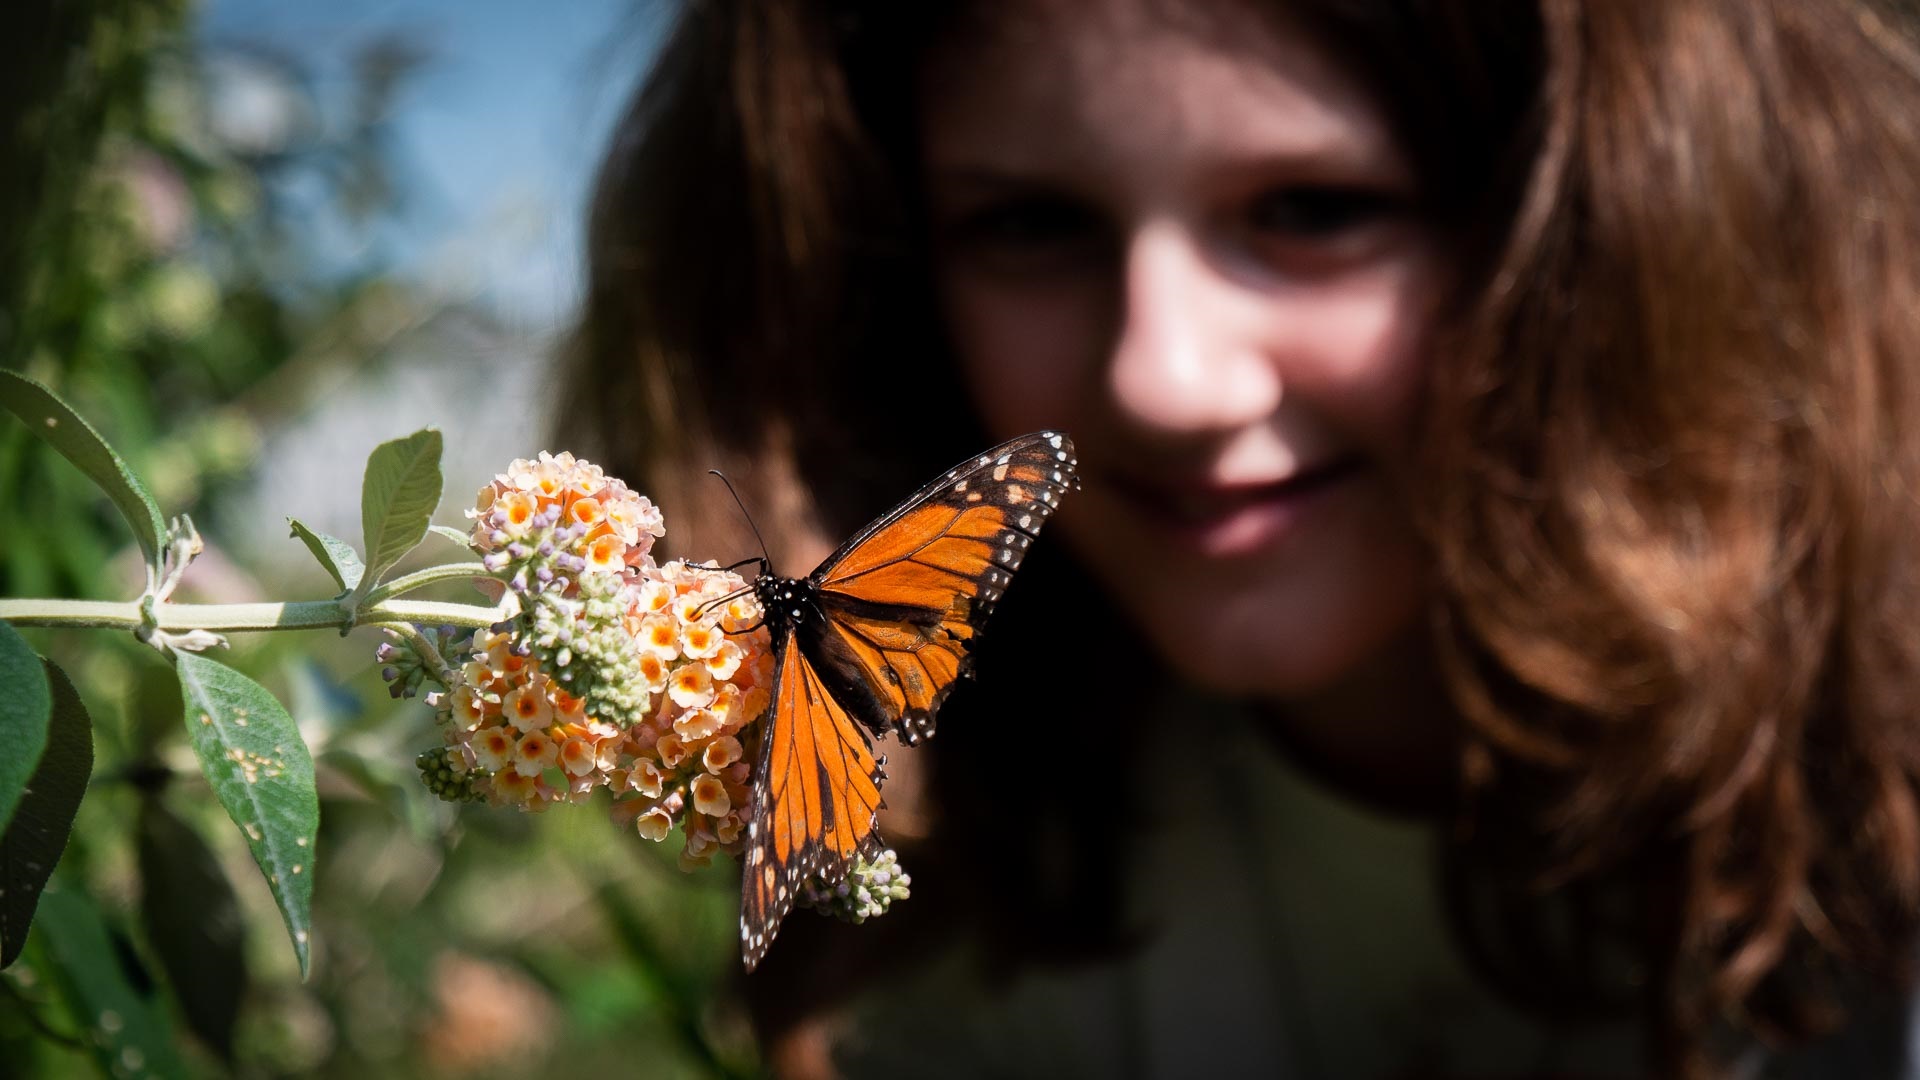 Closeup of child's face looking at butterfly perched on a flower.